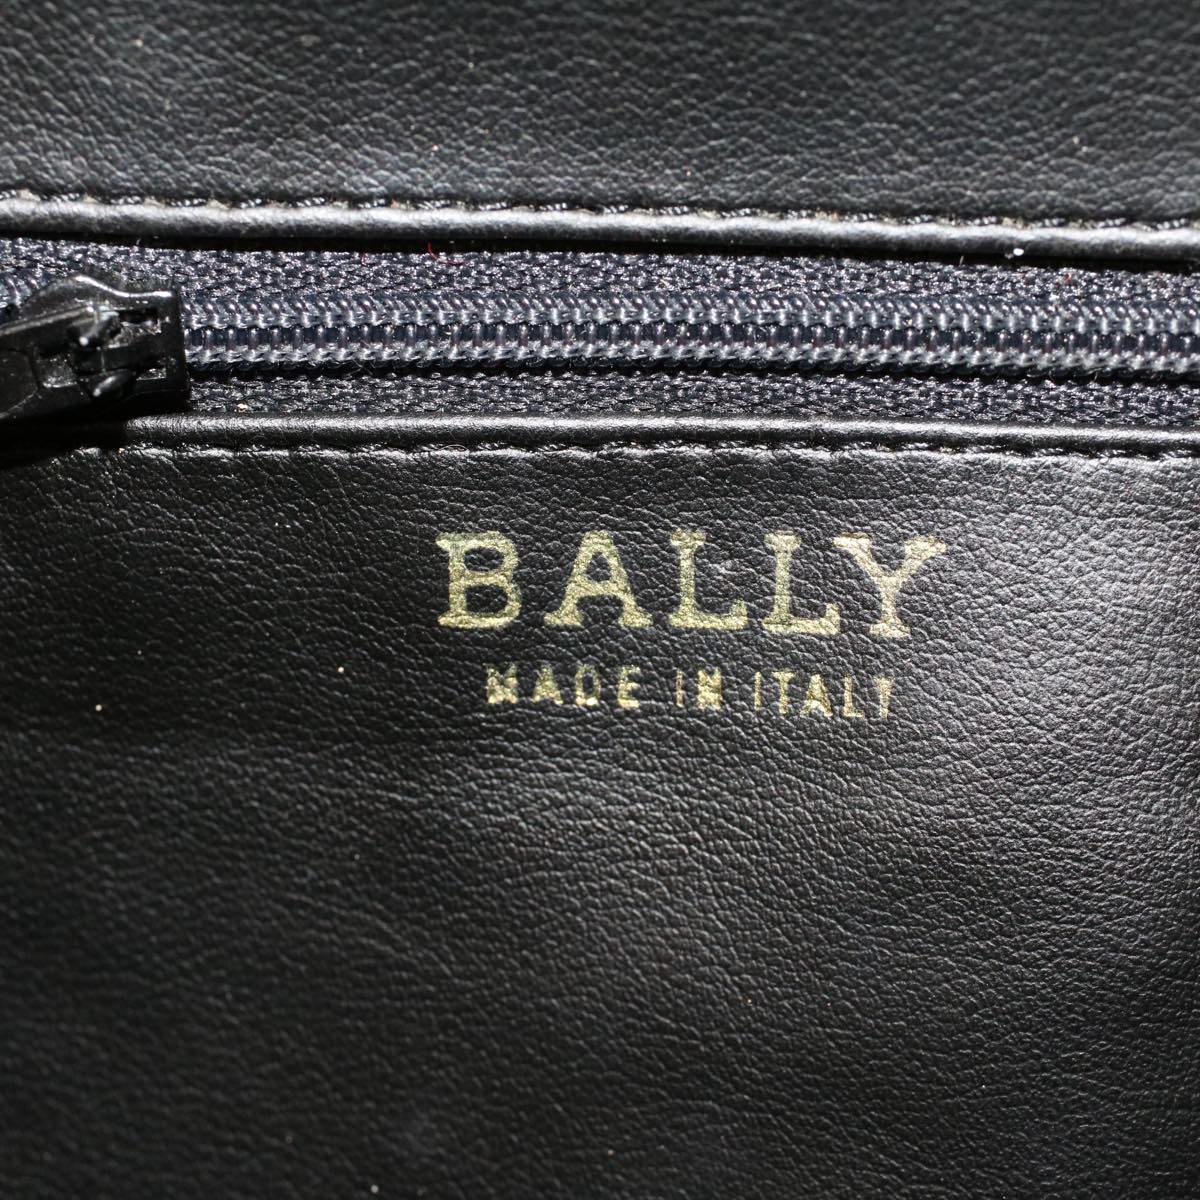 BALLY Quilted Chain Shoulder Bag Leather Beige Auth ep1649